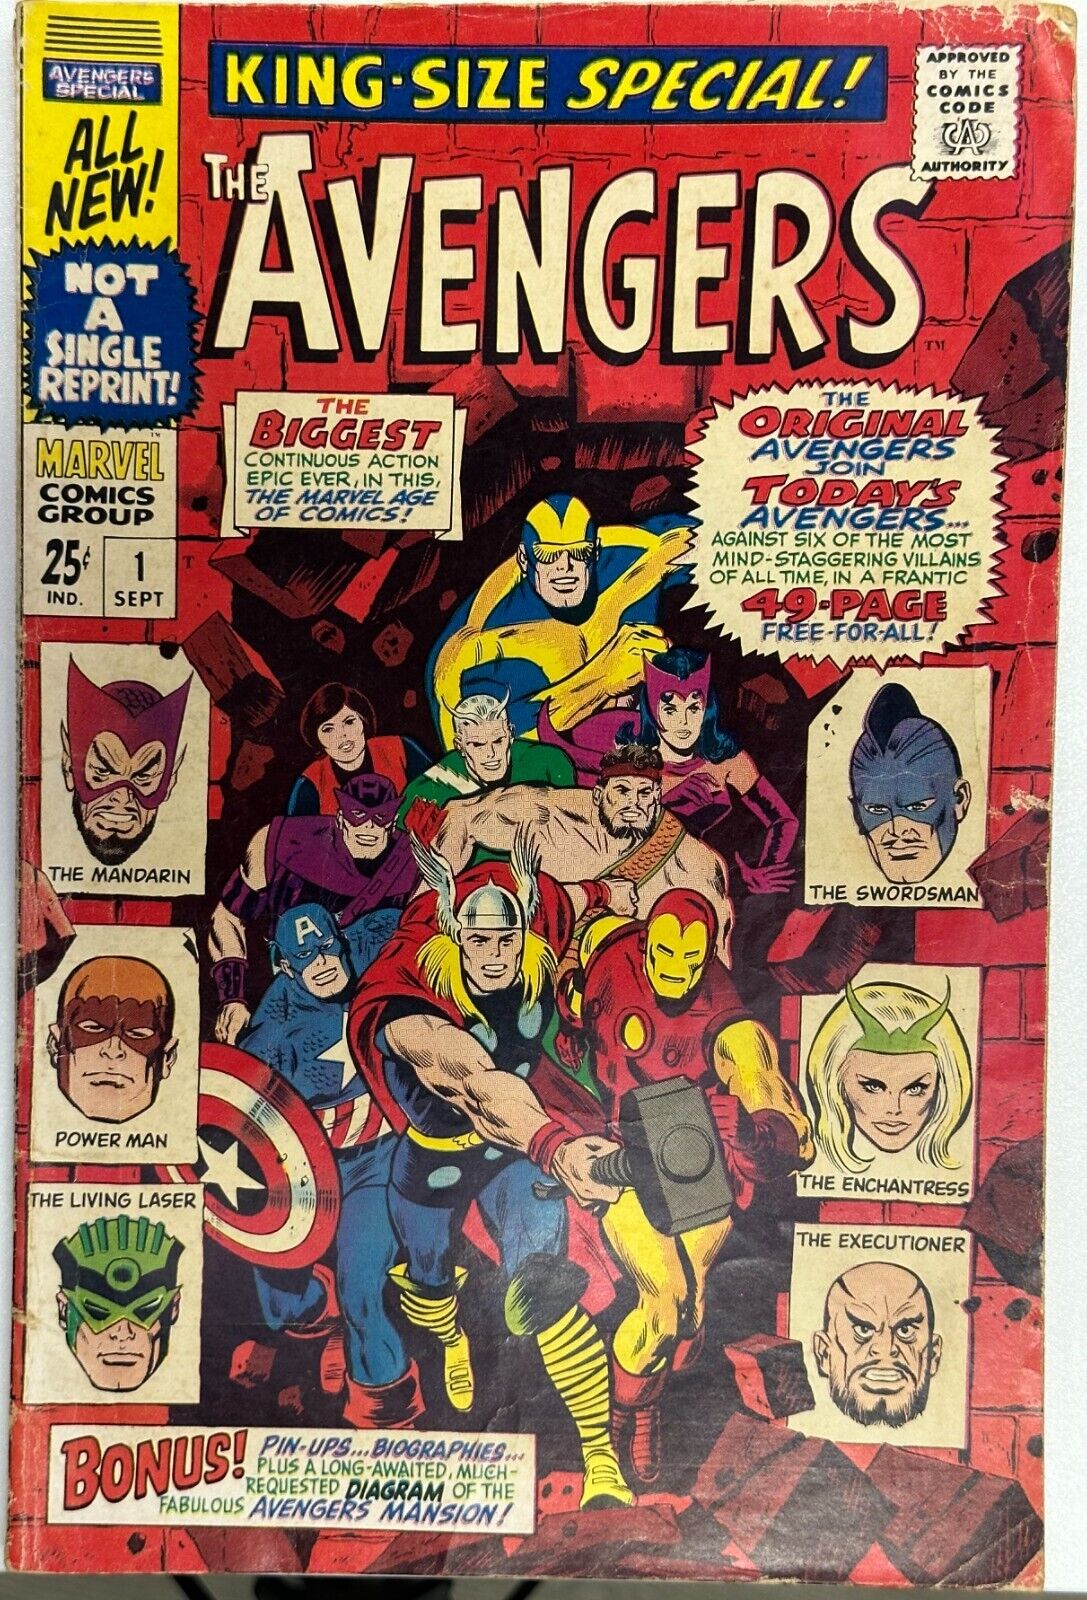 Avengers Annual #1, GD, Marvel Comics 1967 *combine shipping available*